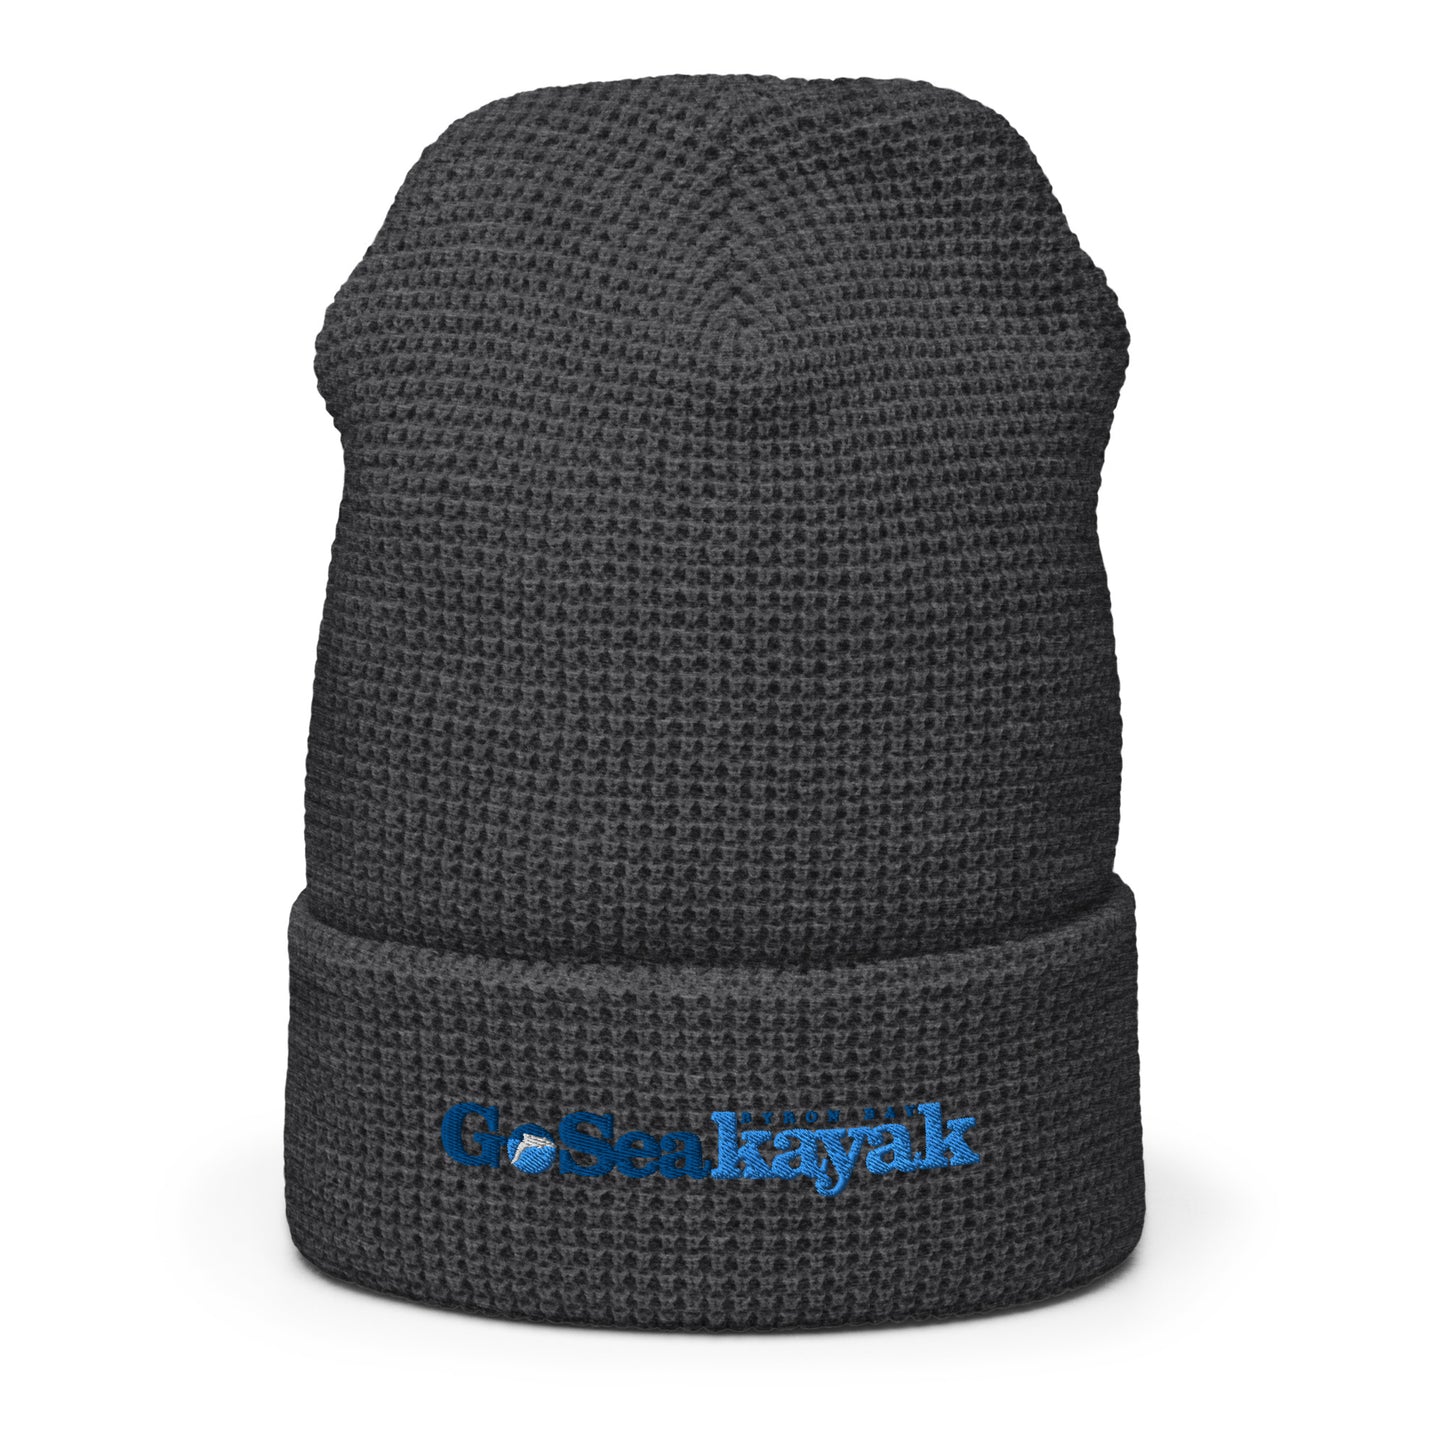  Waffle Beanie - Heather charcoal - Front view - Go Sea Kayak Byron bay logo on front - Genuine Byron Bay Merchandise | Produced by Go Sea Kayak Byron Bay 